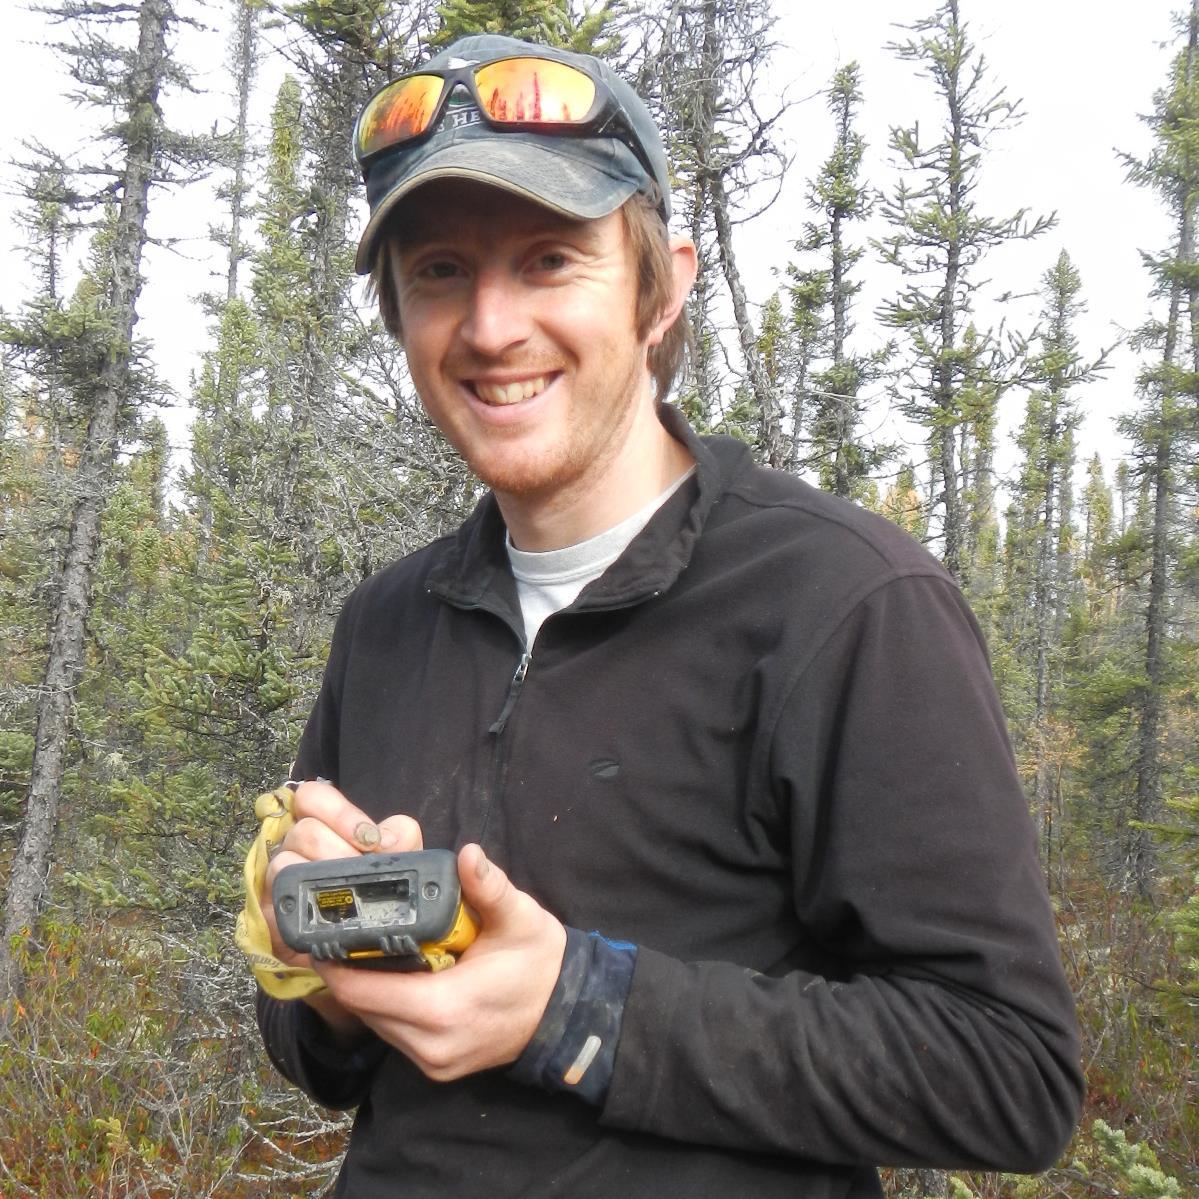 Geologist, cricketer, gardener. Interests in northern Canada, energy and resources, and natural history.